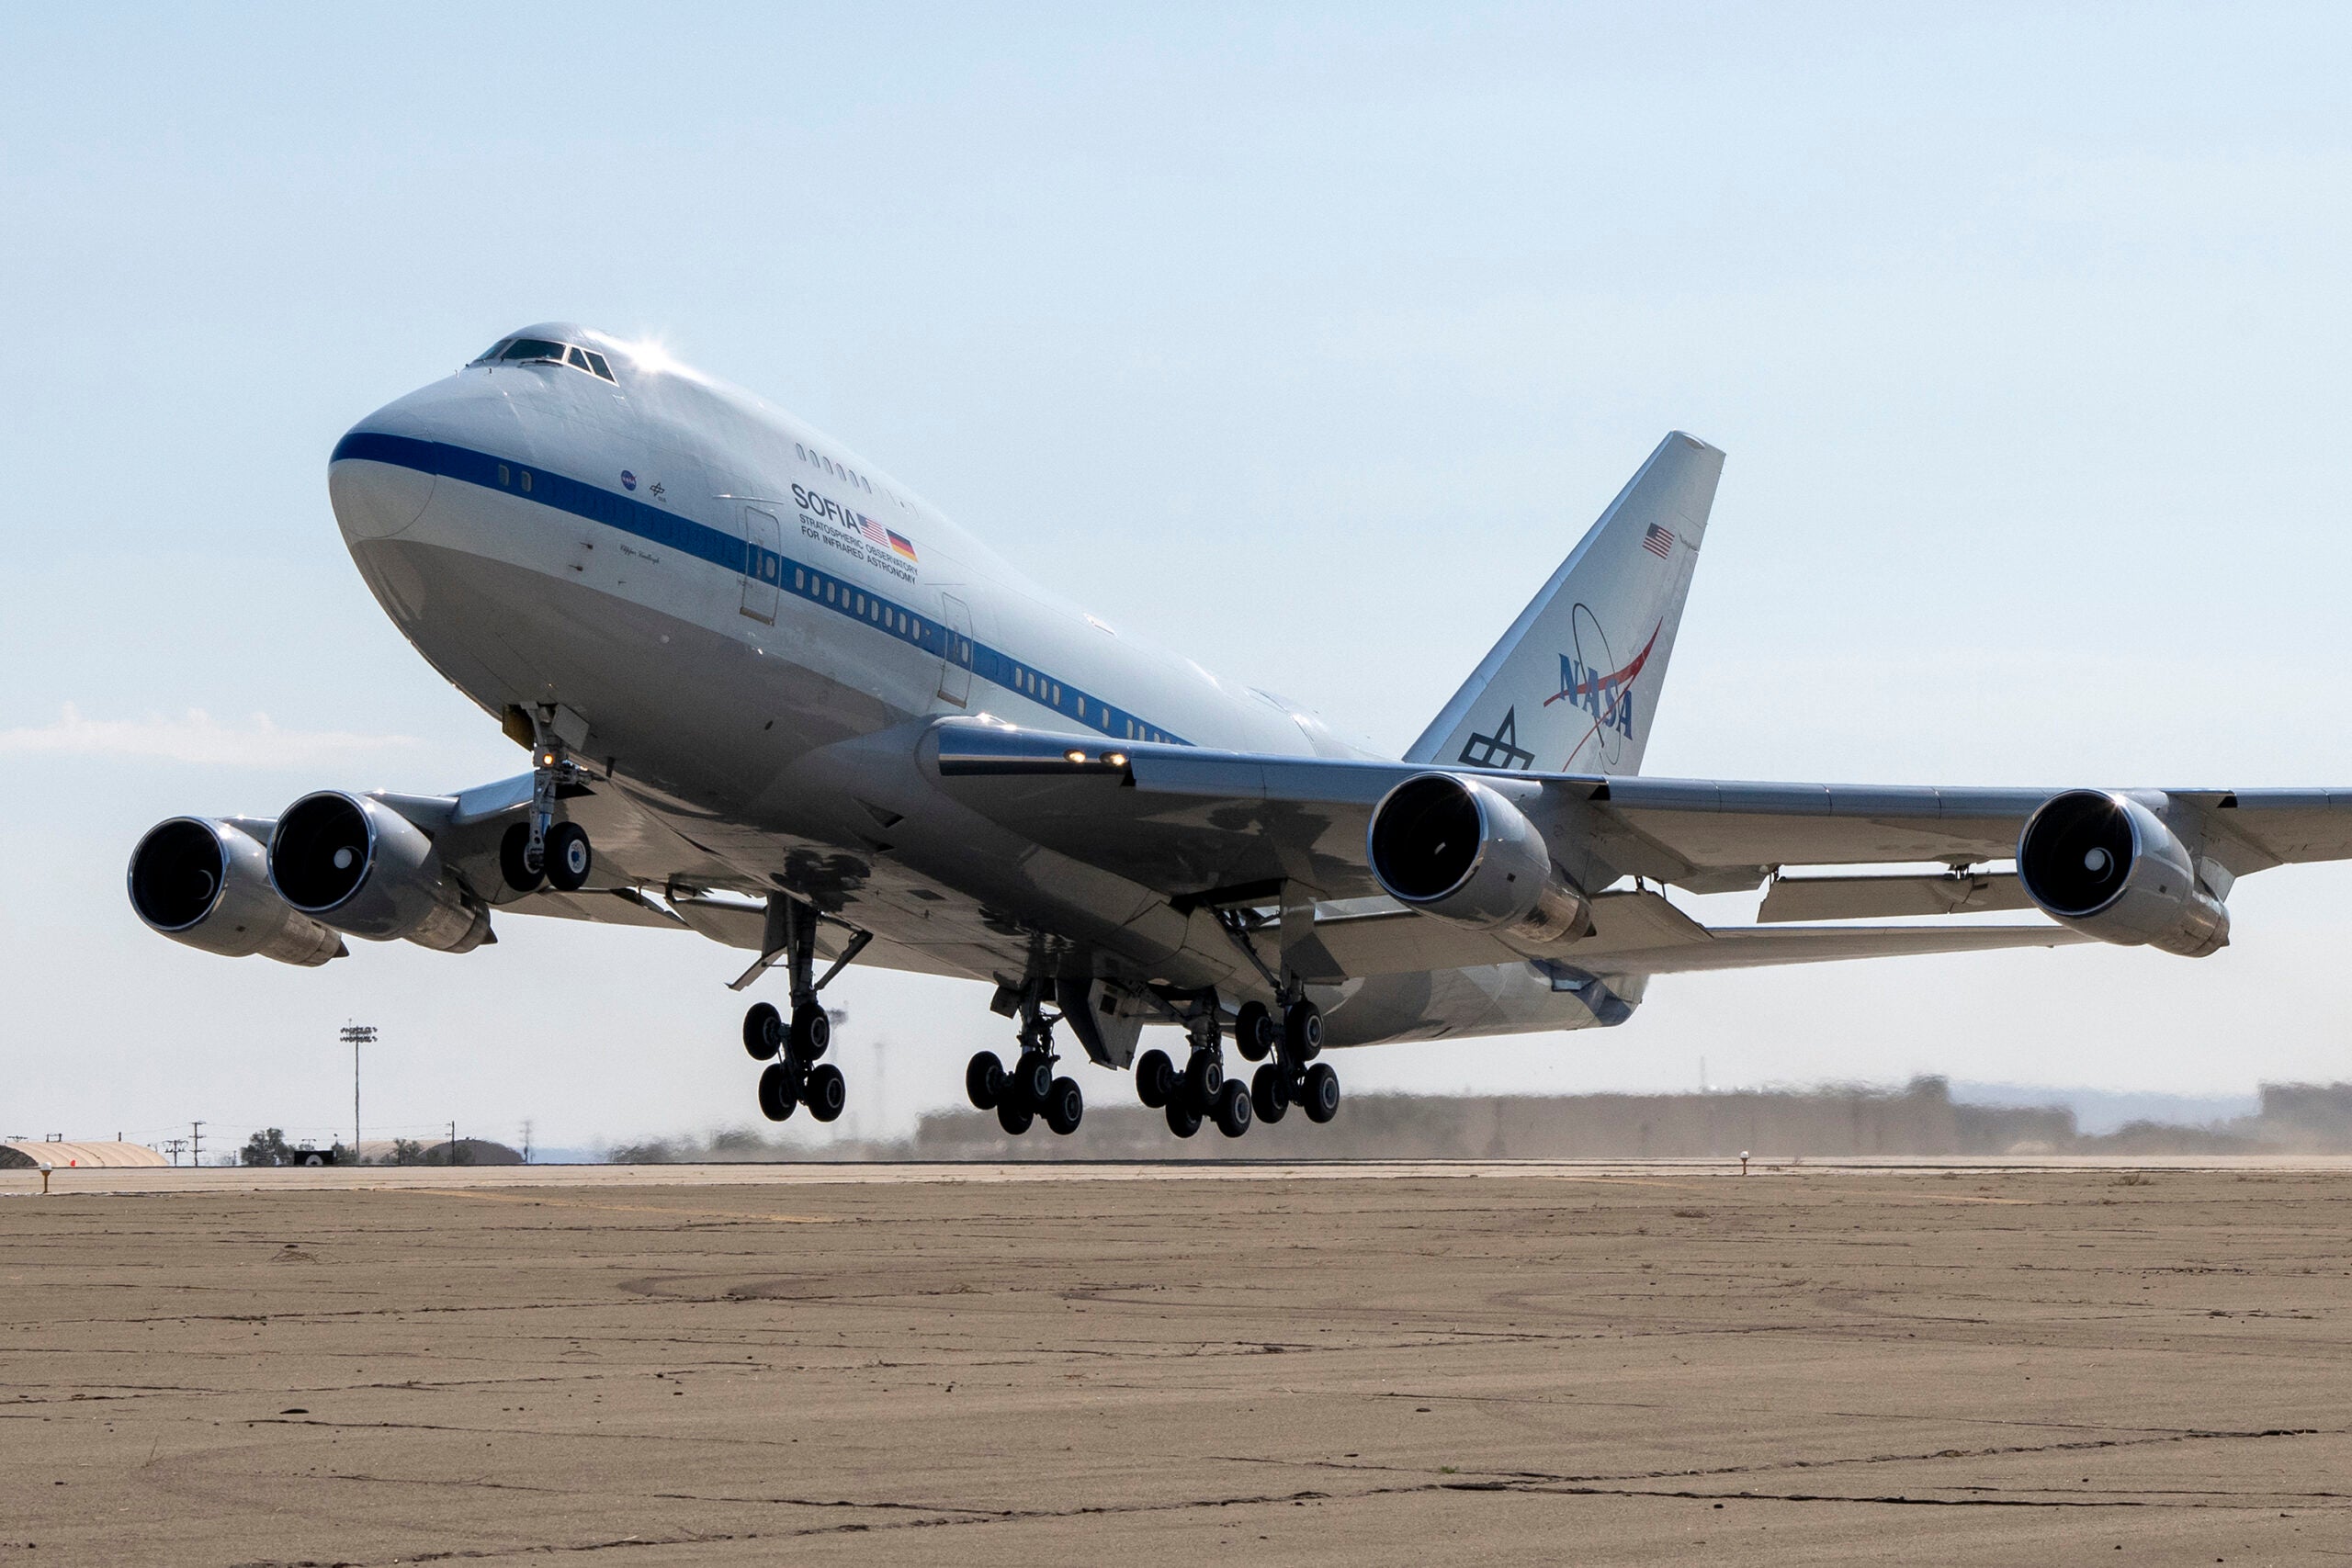 NASA’s Unique SOFIA Boeing 747SP Flying Telescope Is Done